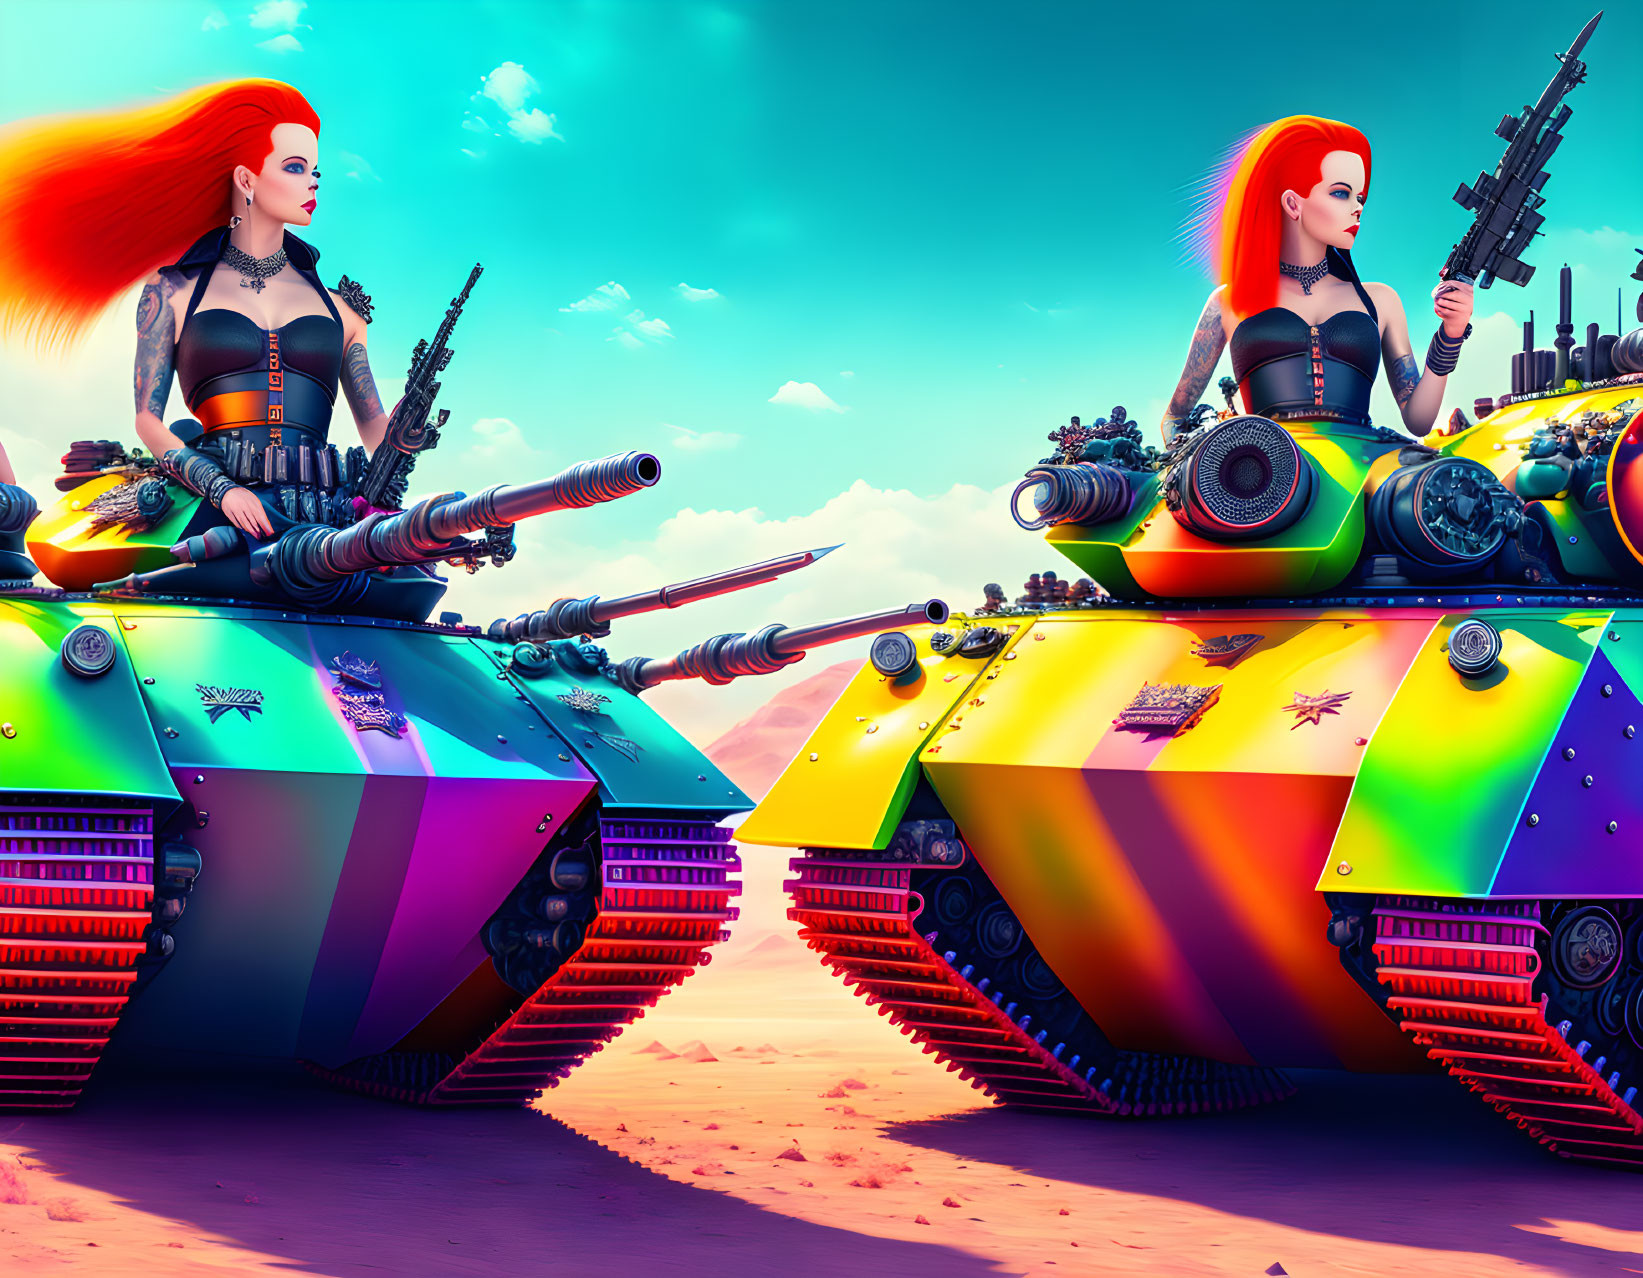 Two women with red mohawks in combat outfits on vibrant tanks under a blue sky